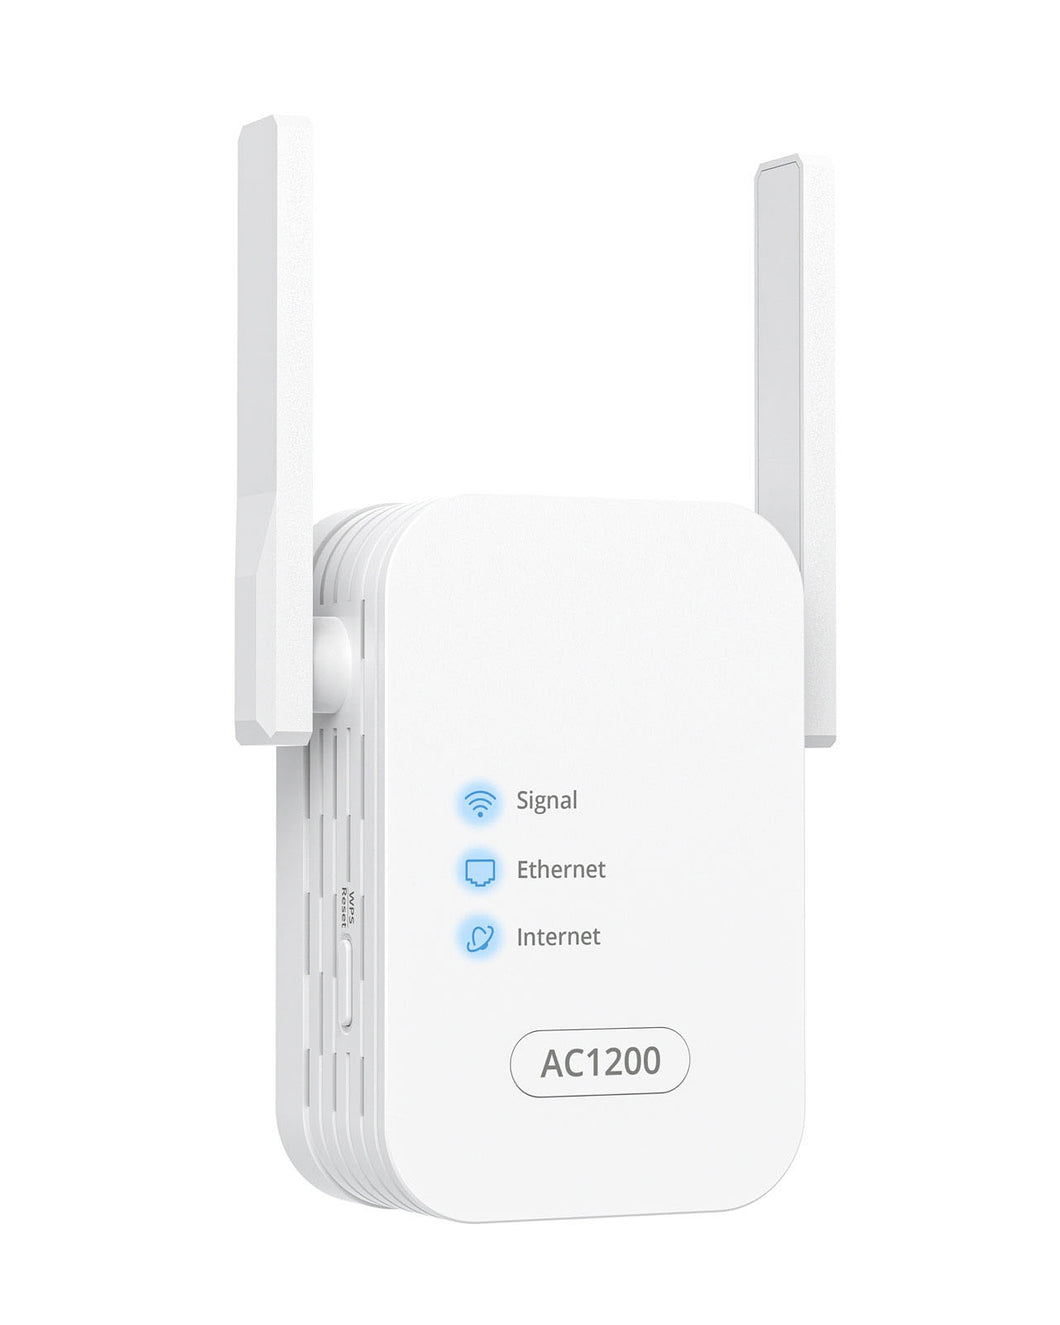 1200Mbps WiFi Extender Dual Band AC1200 WiFi Extender Extends Router’s WiFi and Eliminates WiFi Dead Zones